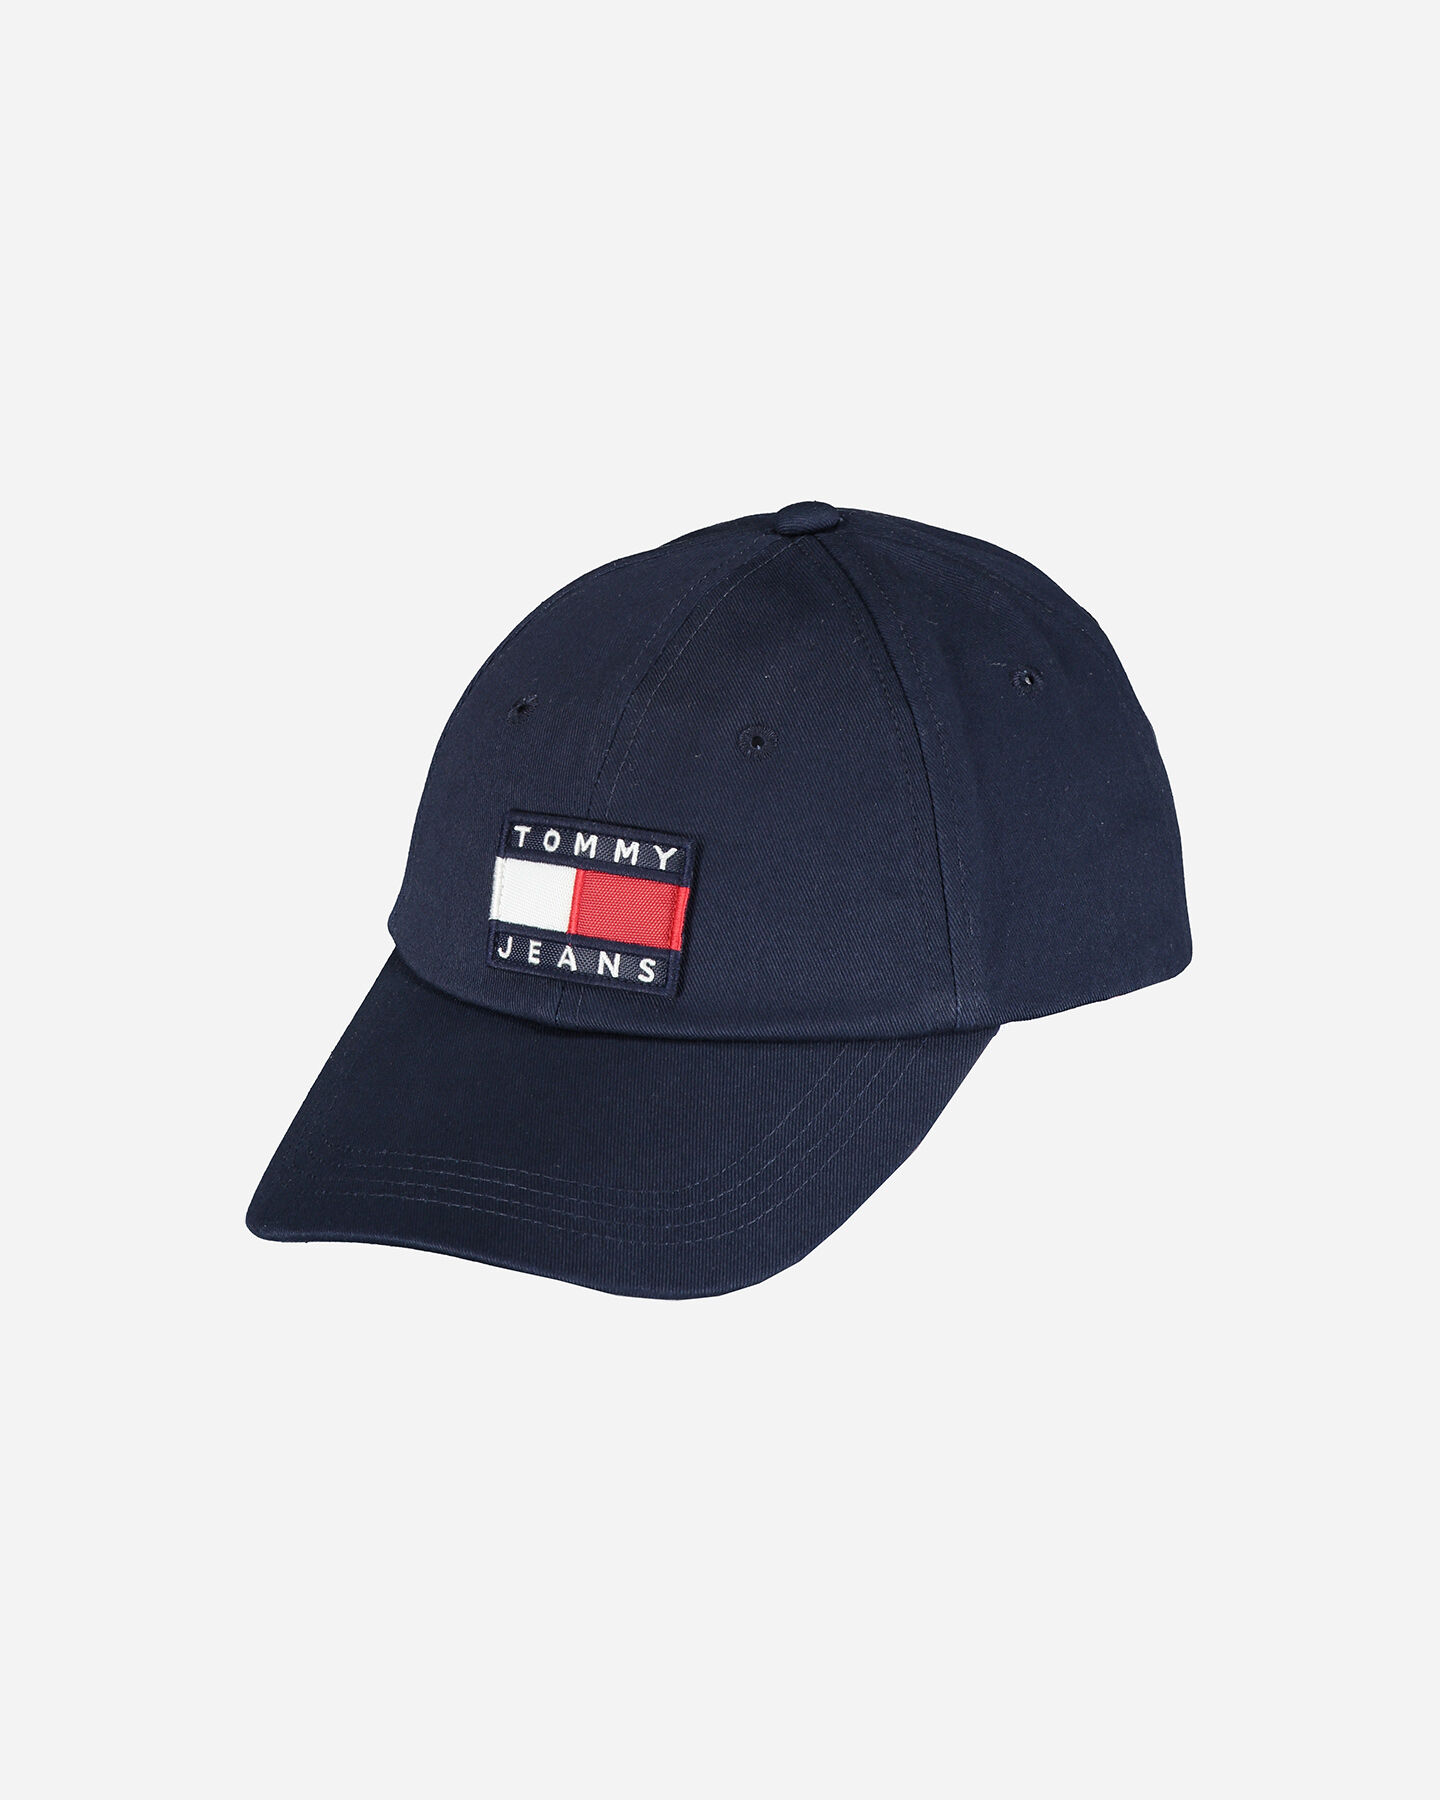  Cappellino TOMMY HILFIGER HERITAGE LOGO M S4073638|CBK|OS scatto 0